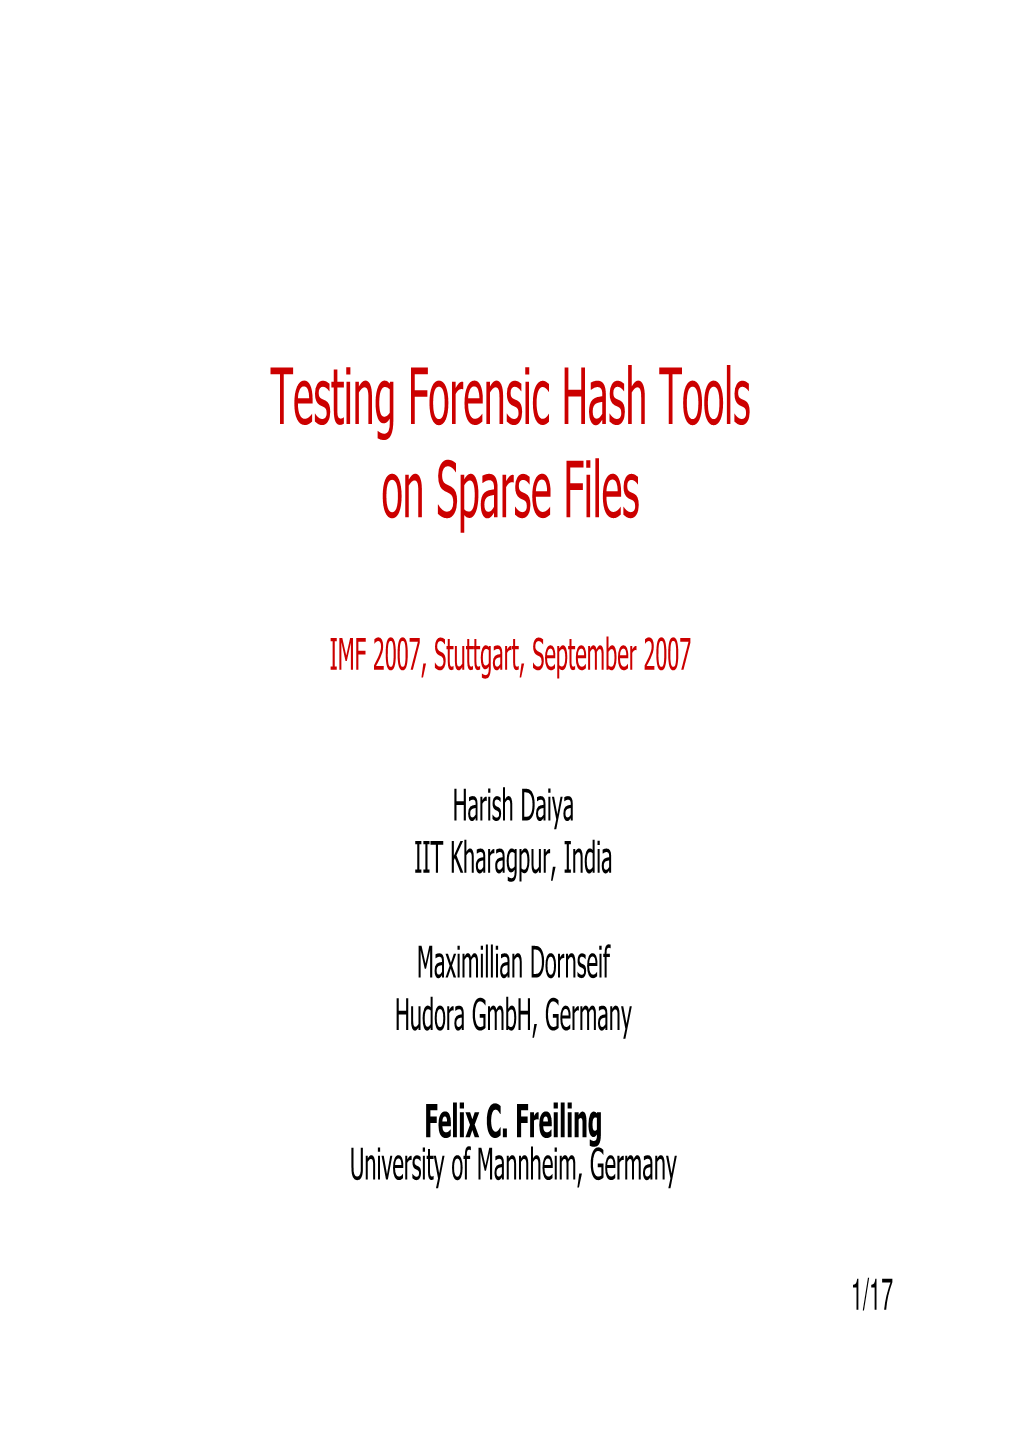 Testing Forensic Hash Tools on Sparse Files